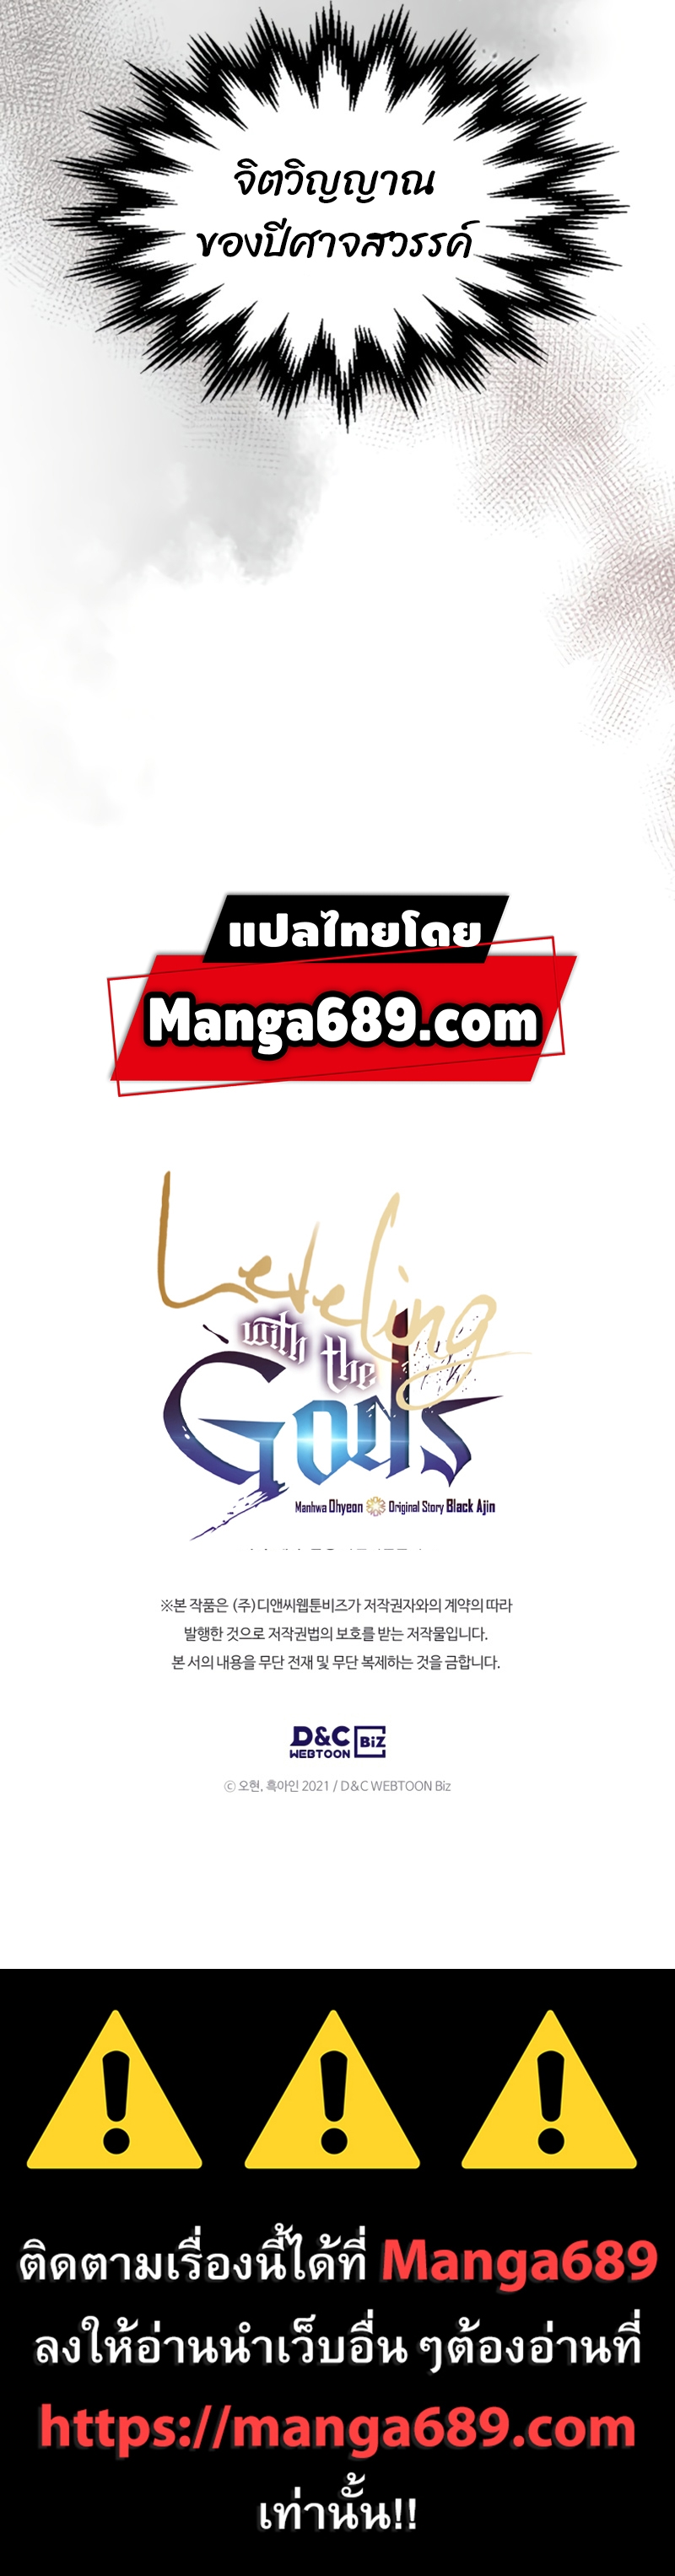 Leveling With The Gods39 (14)